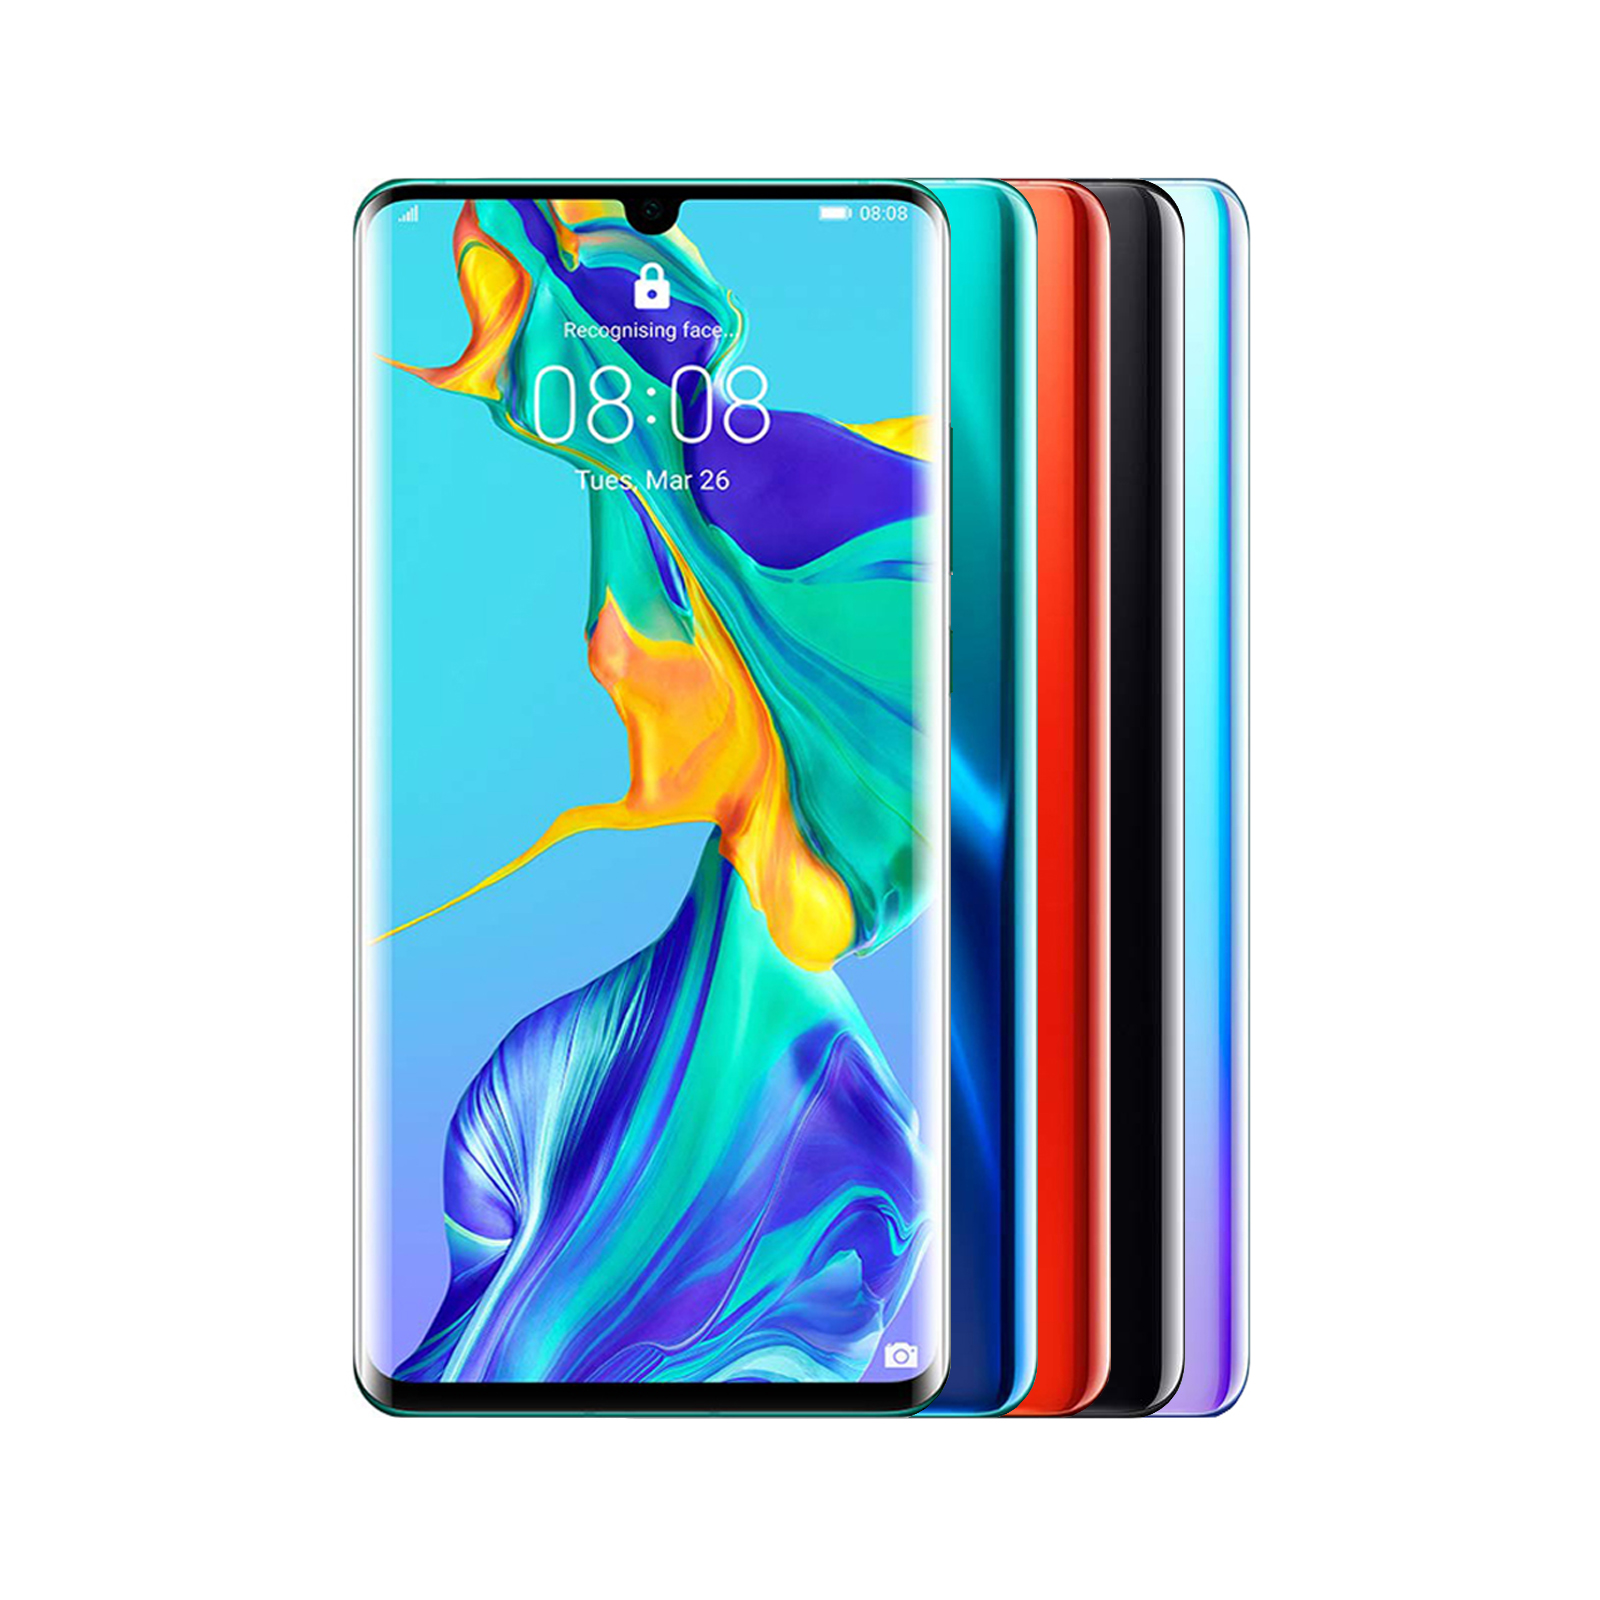 Huawei P30 Pro - New in Box